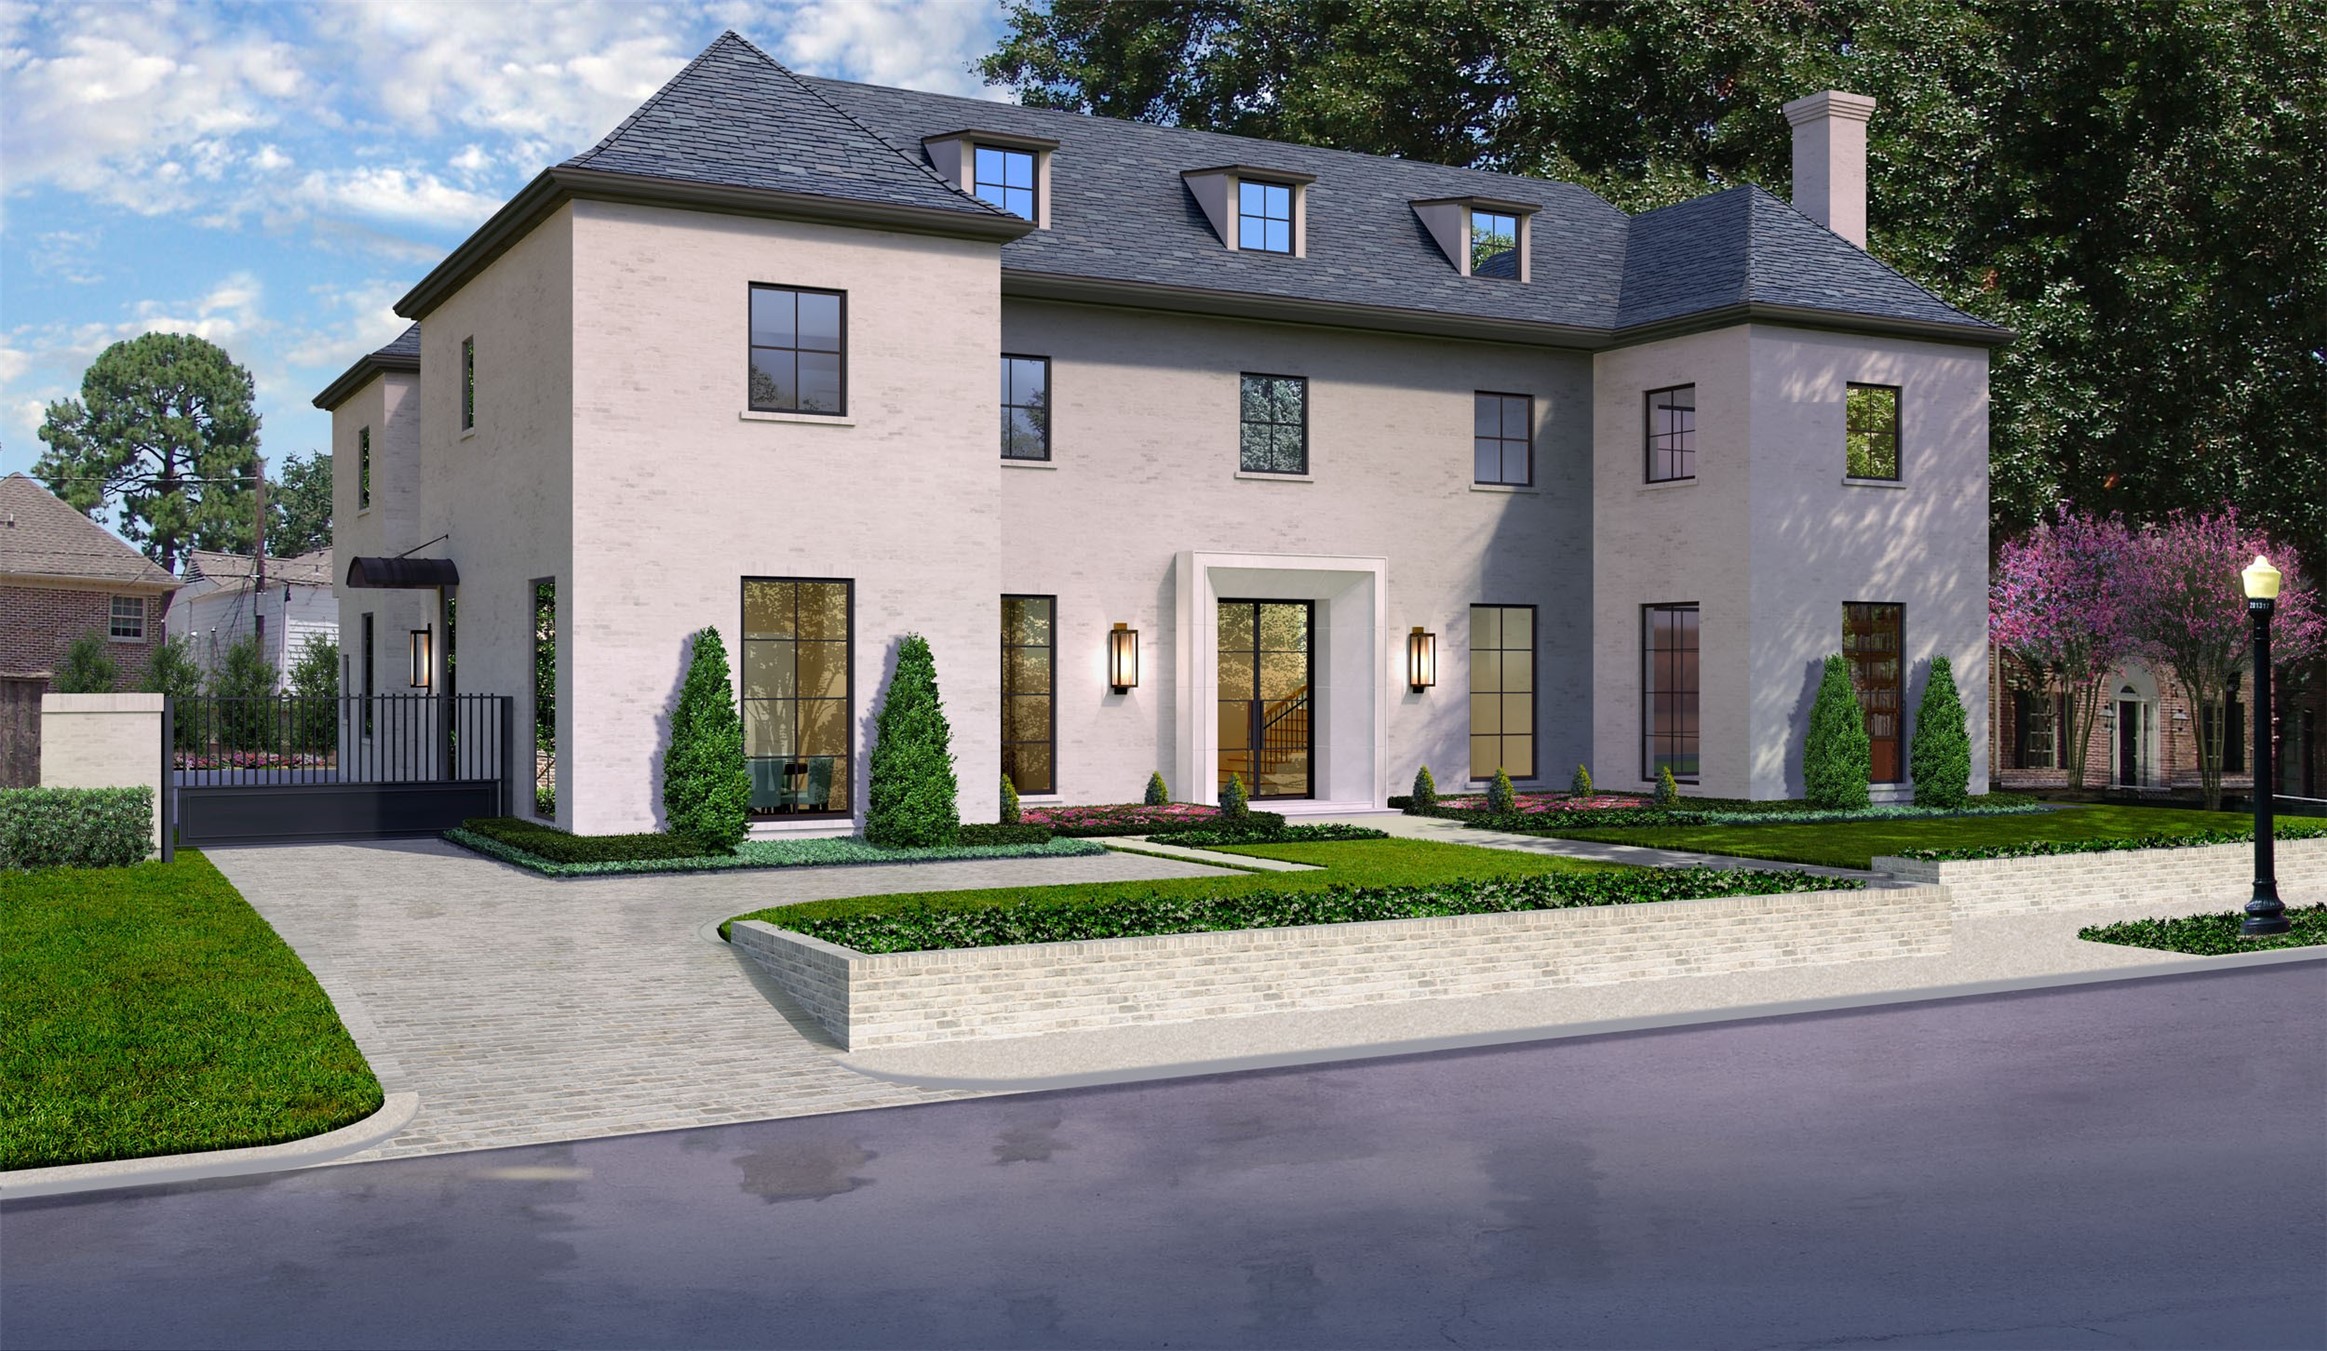 Front Elevation Rendering without existing trees.